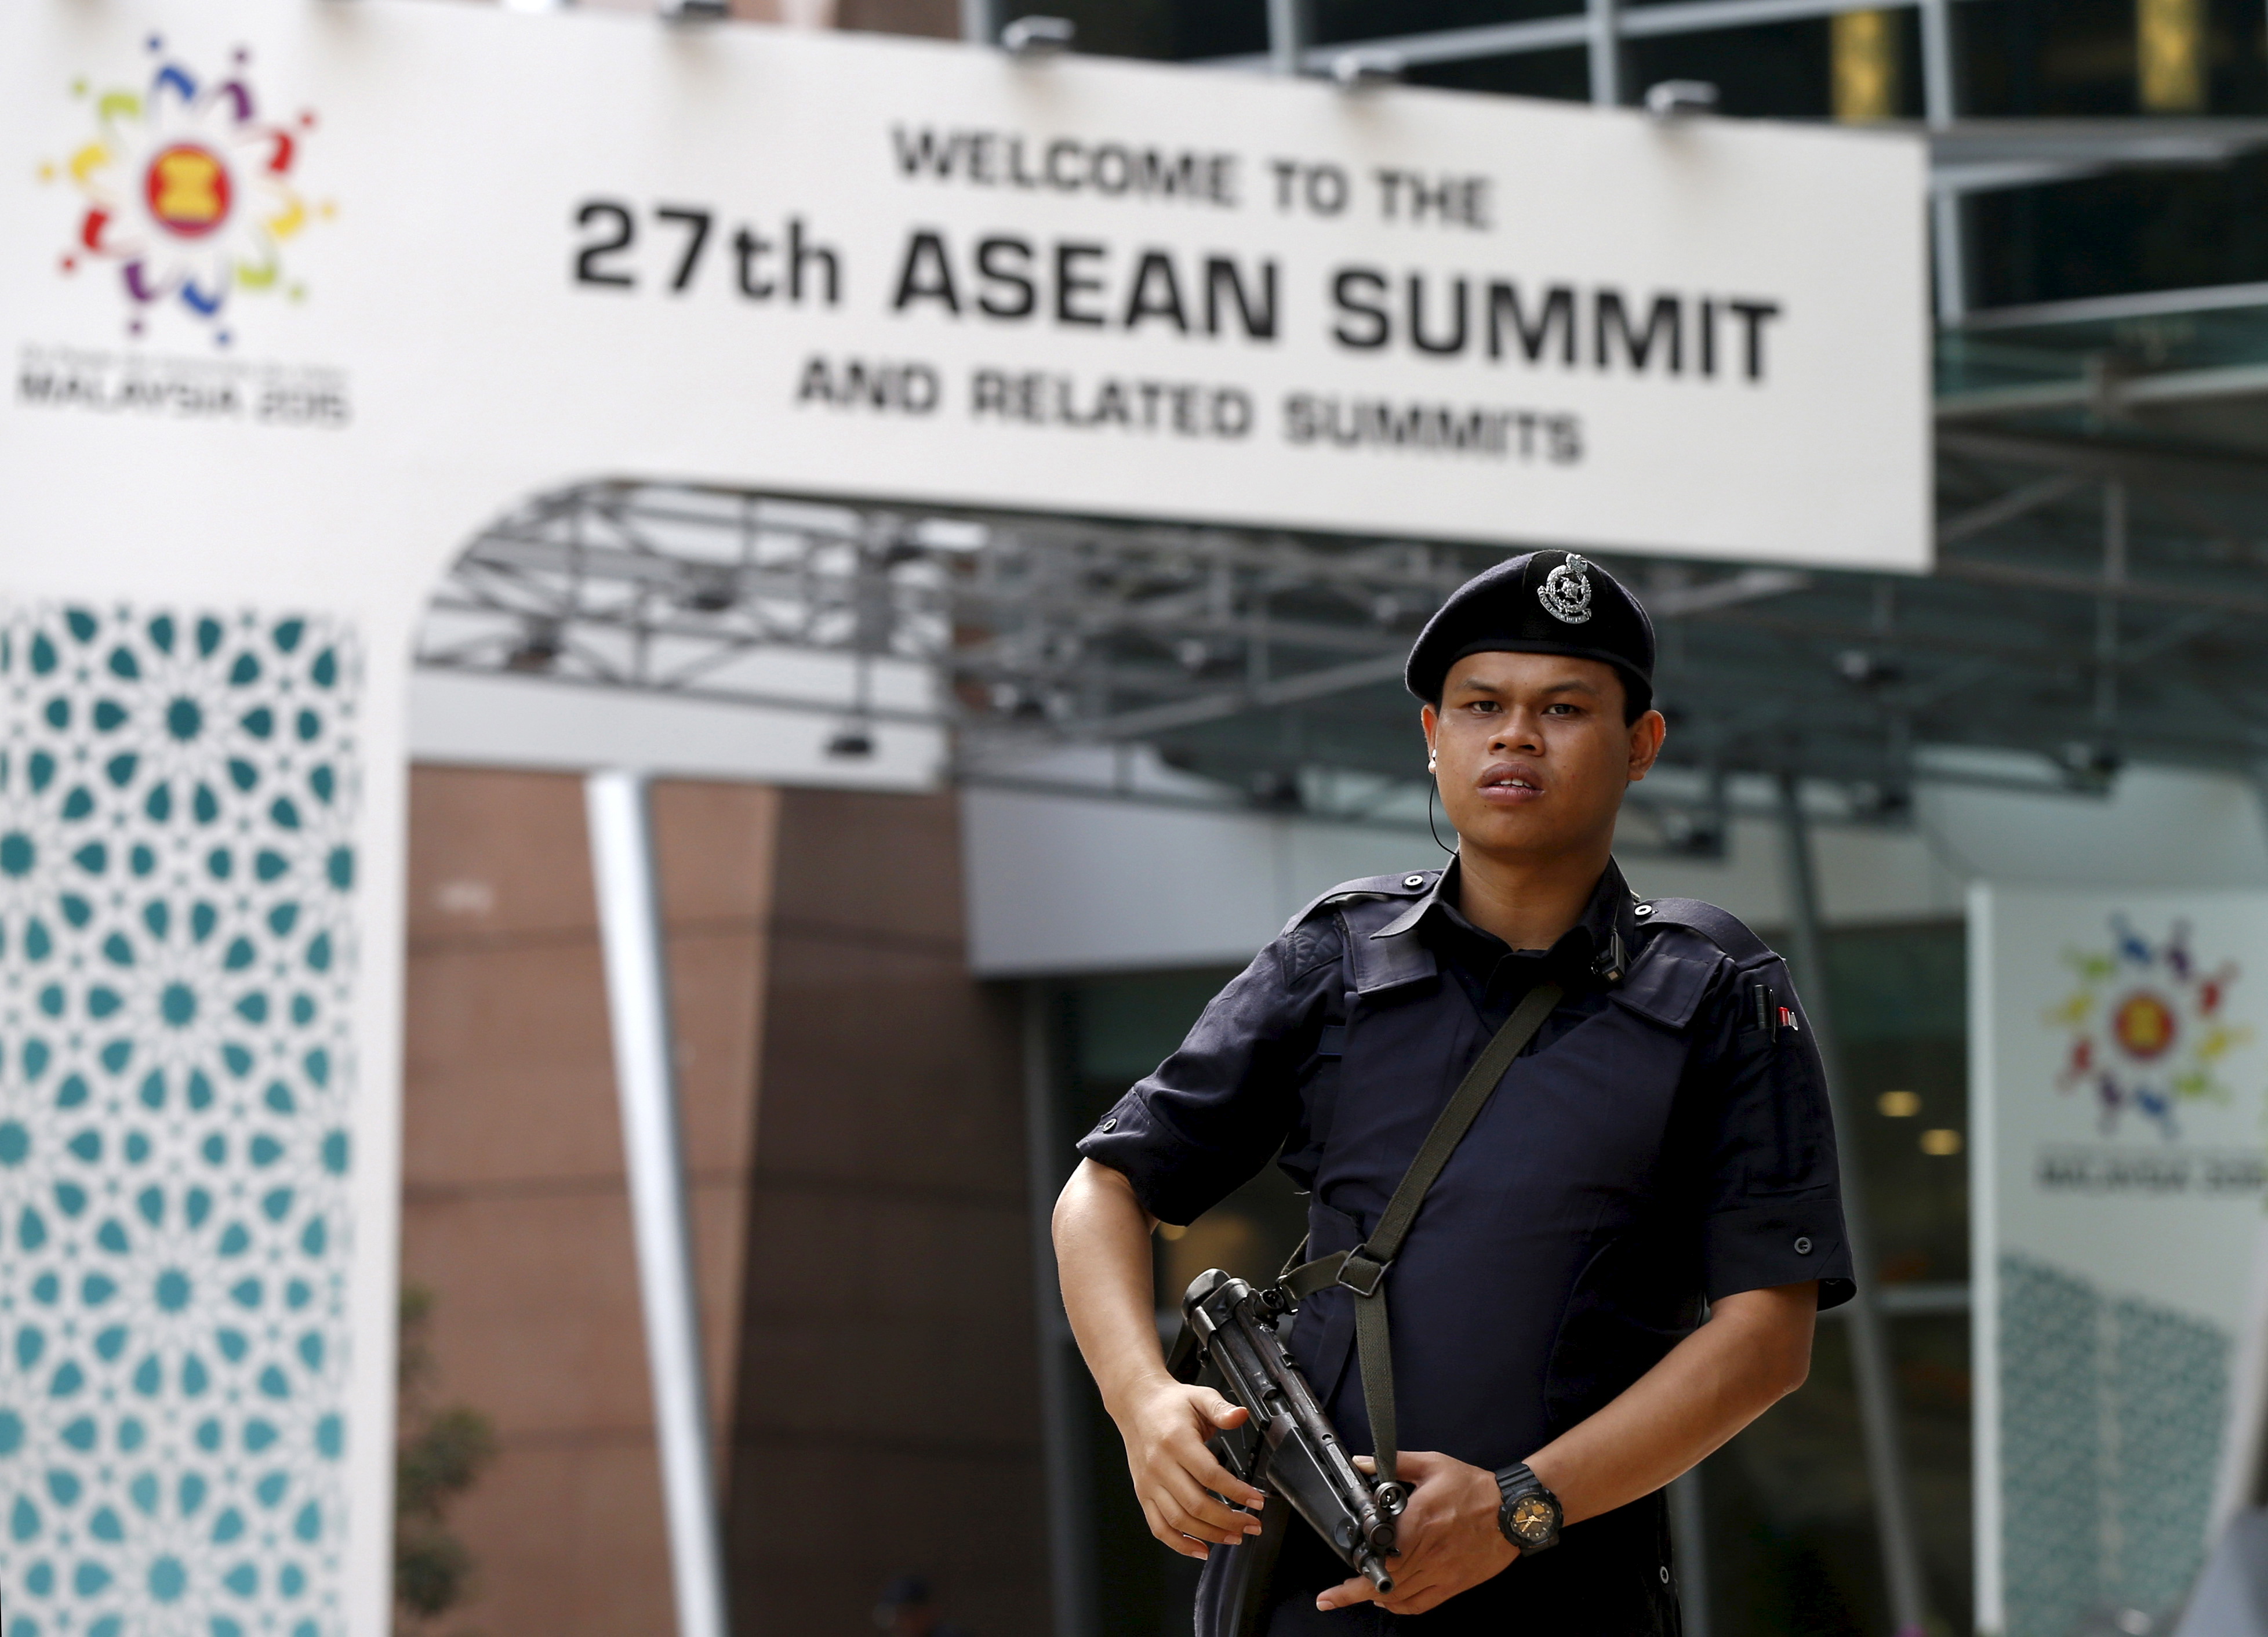 A police officer patrols outside the venue for the 27th ASEAN summit in Kuala Lumpur